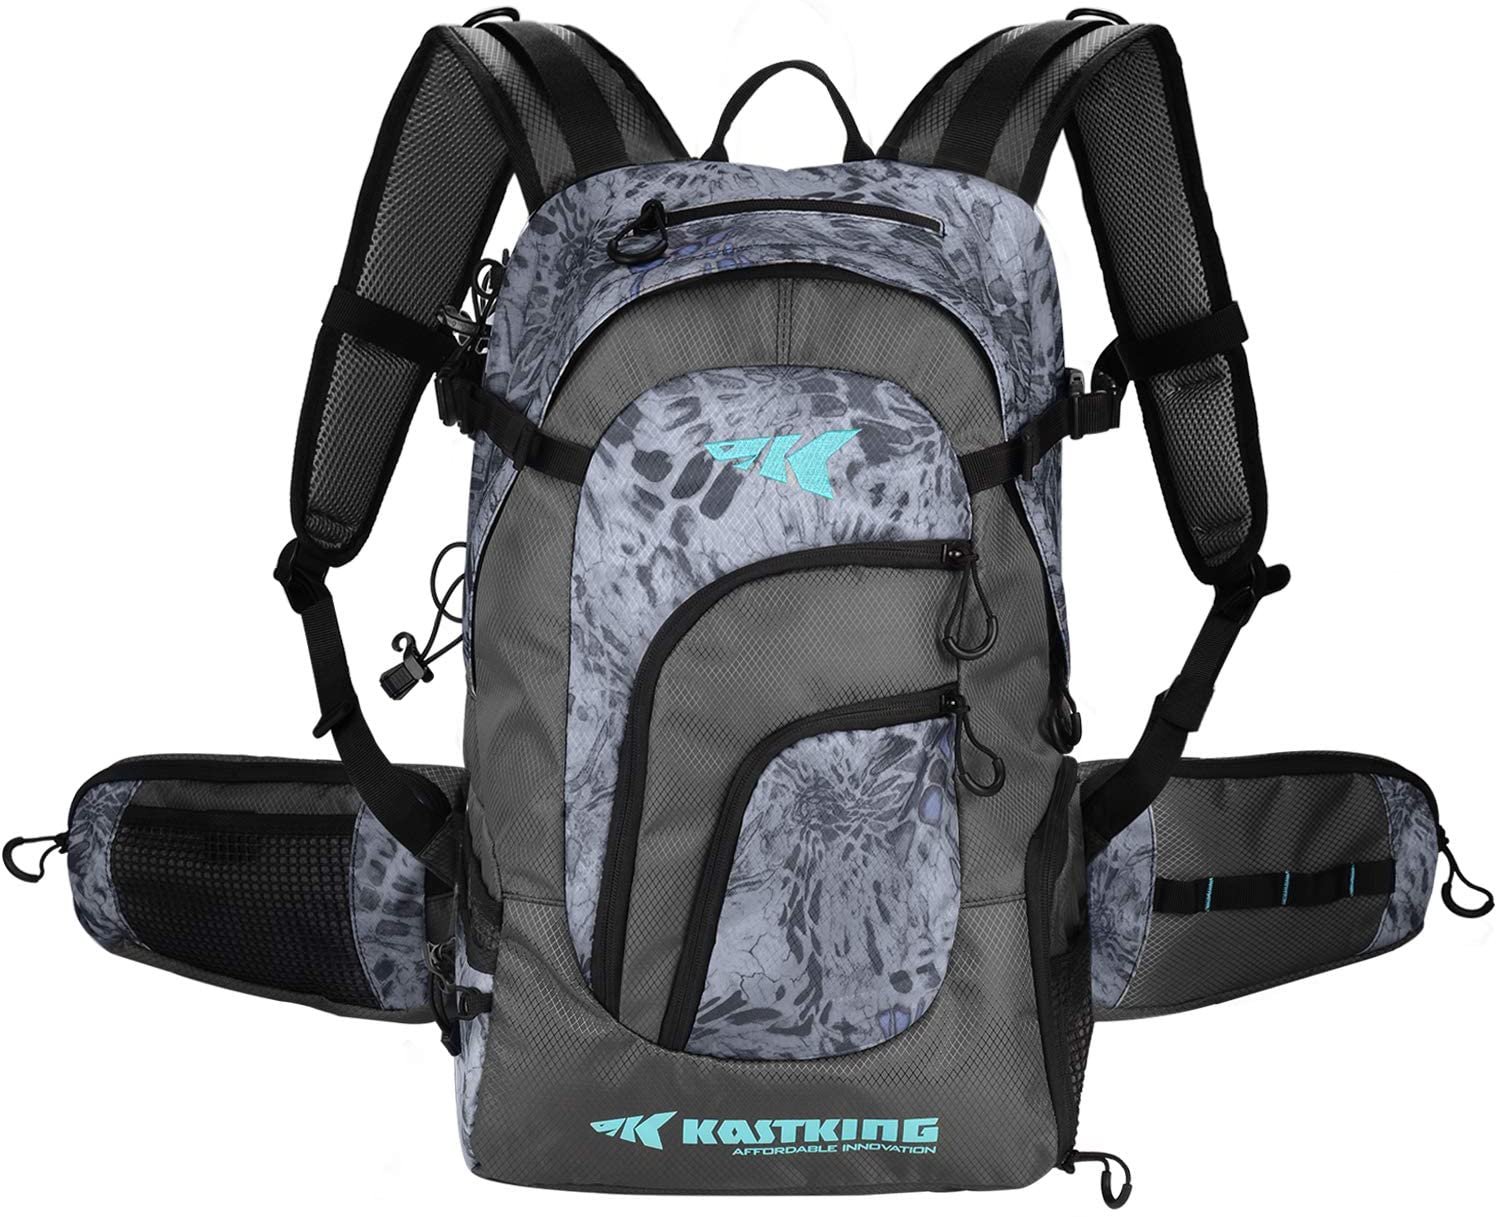 Best Fishing Backpack Under 100 - Our Top 5 Picks!